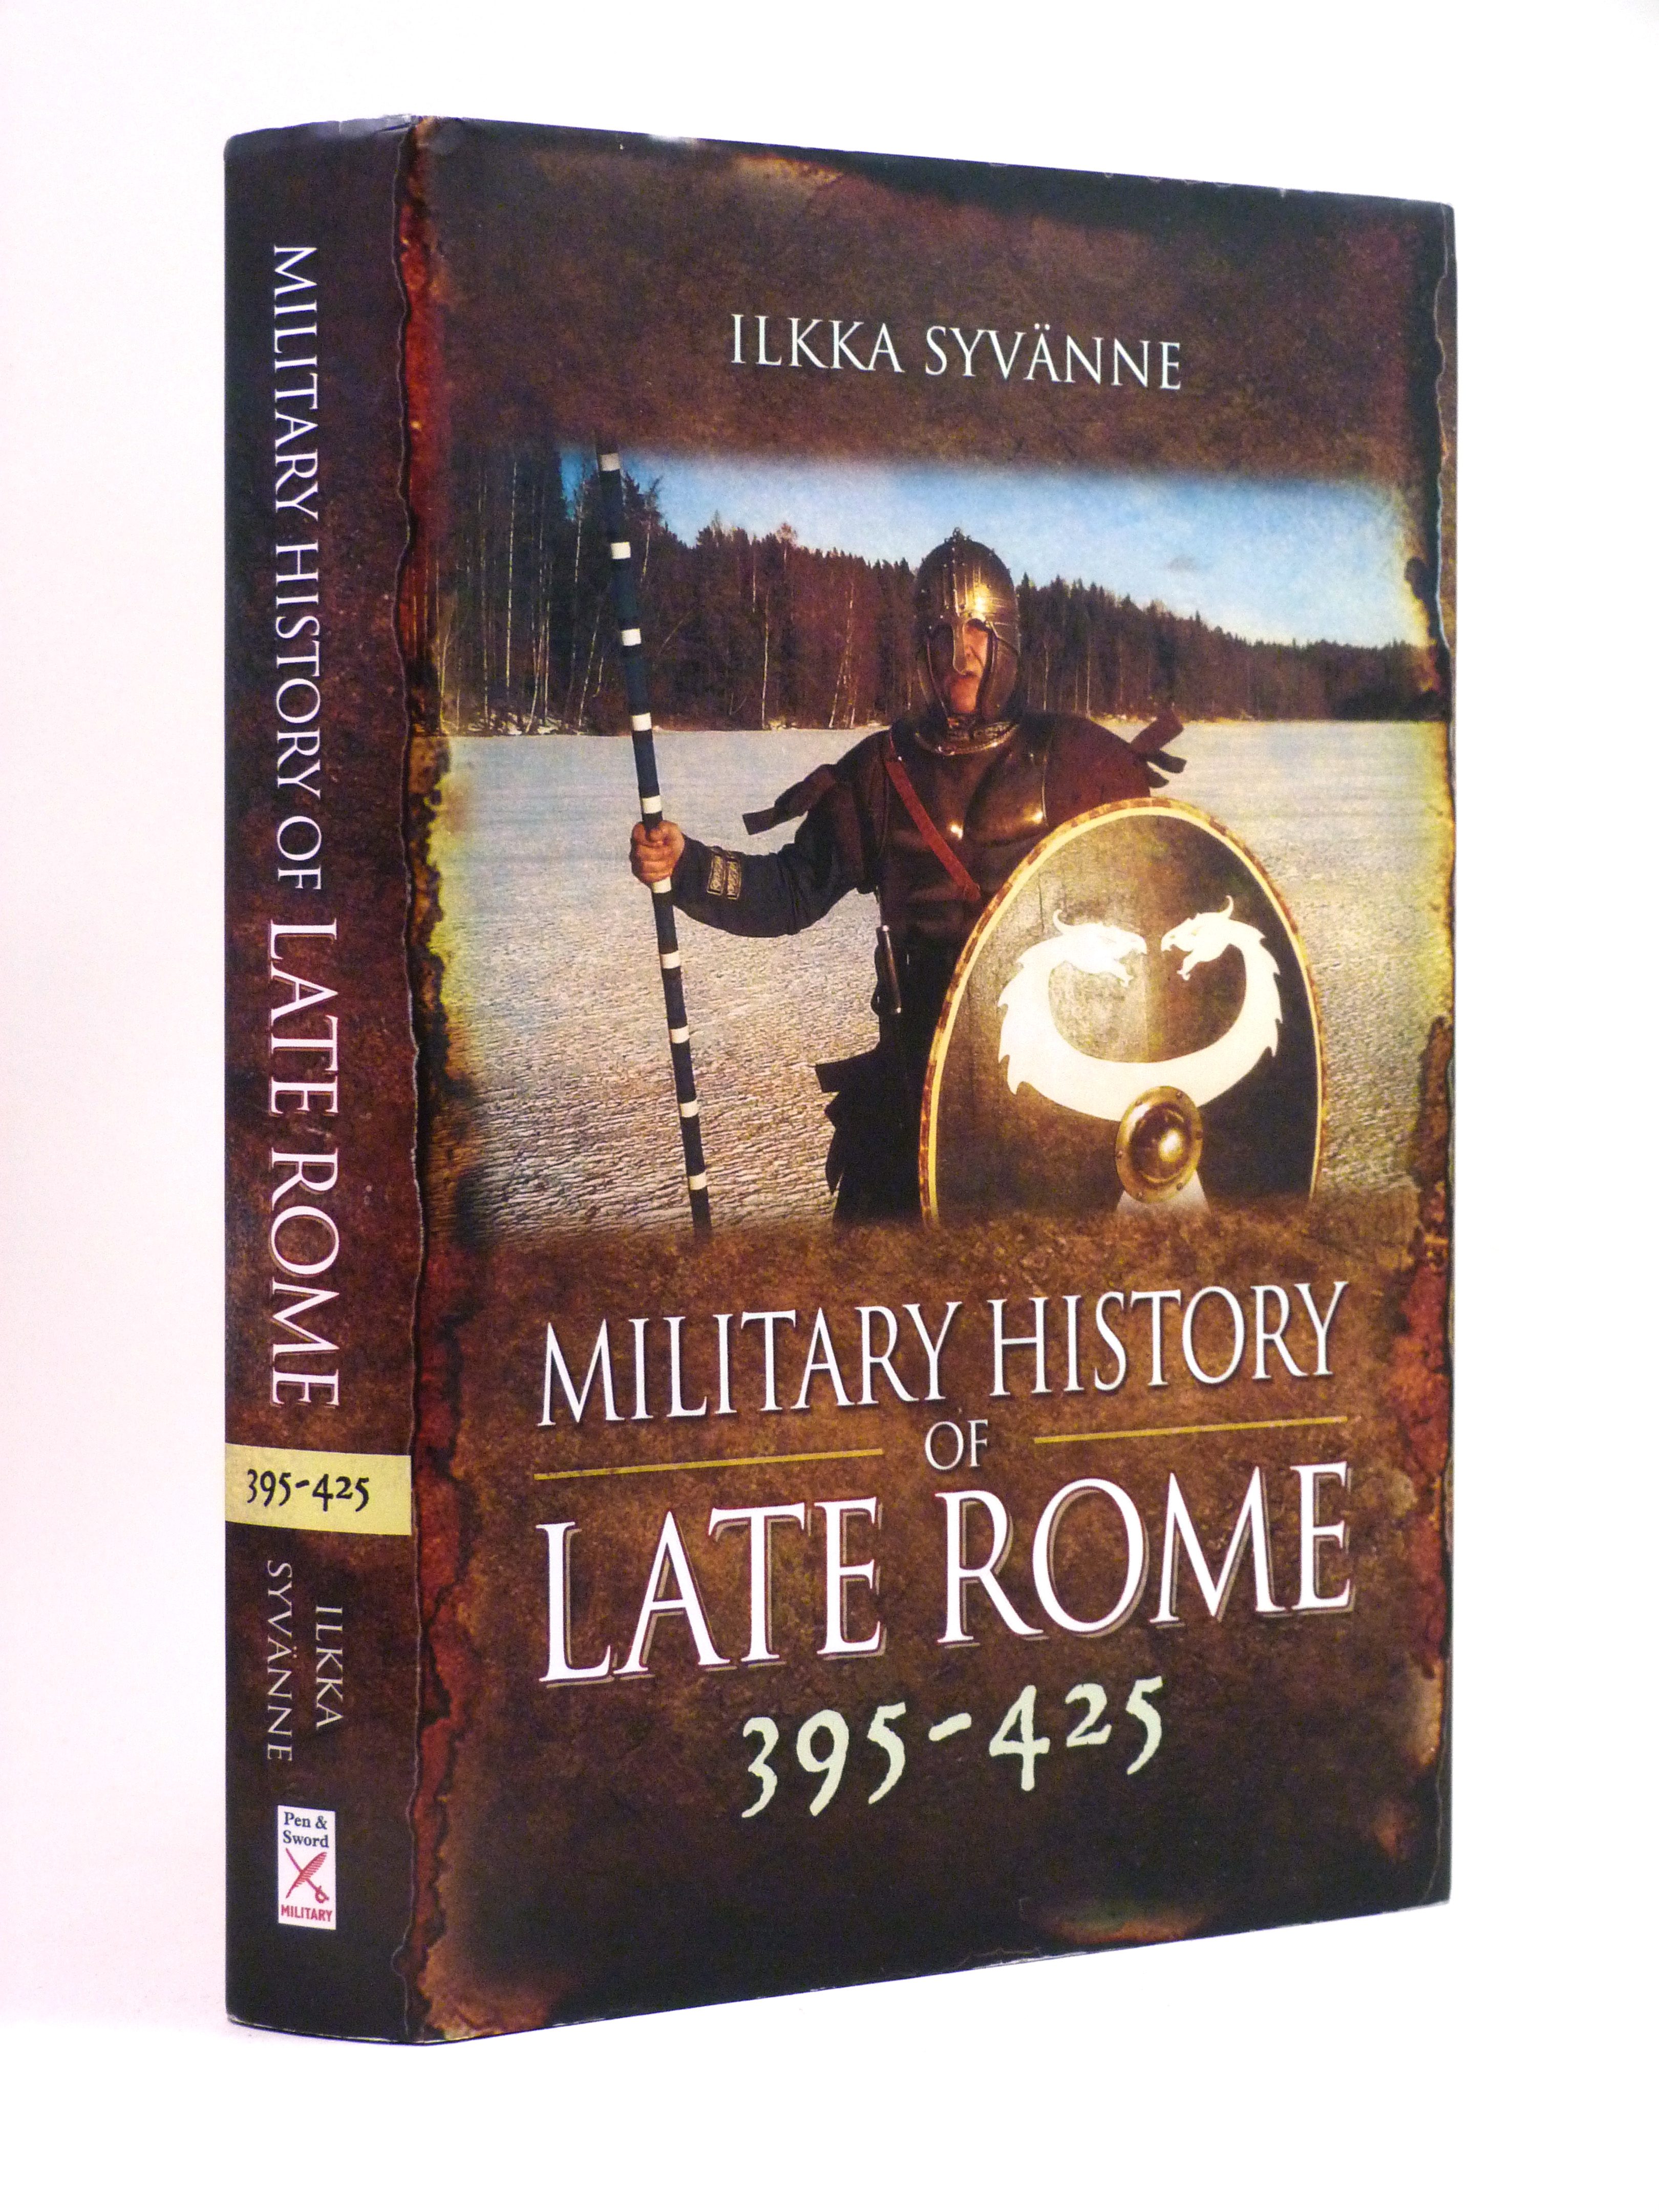 Military History of Late Rome 395-425 - Ilkka Syvanne